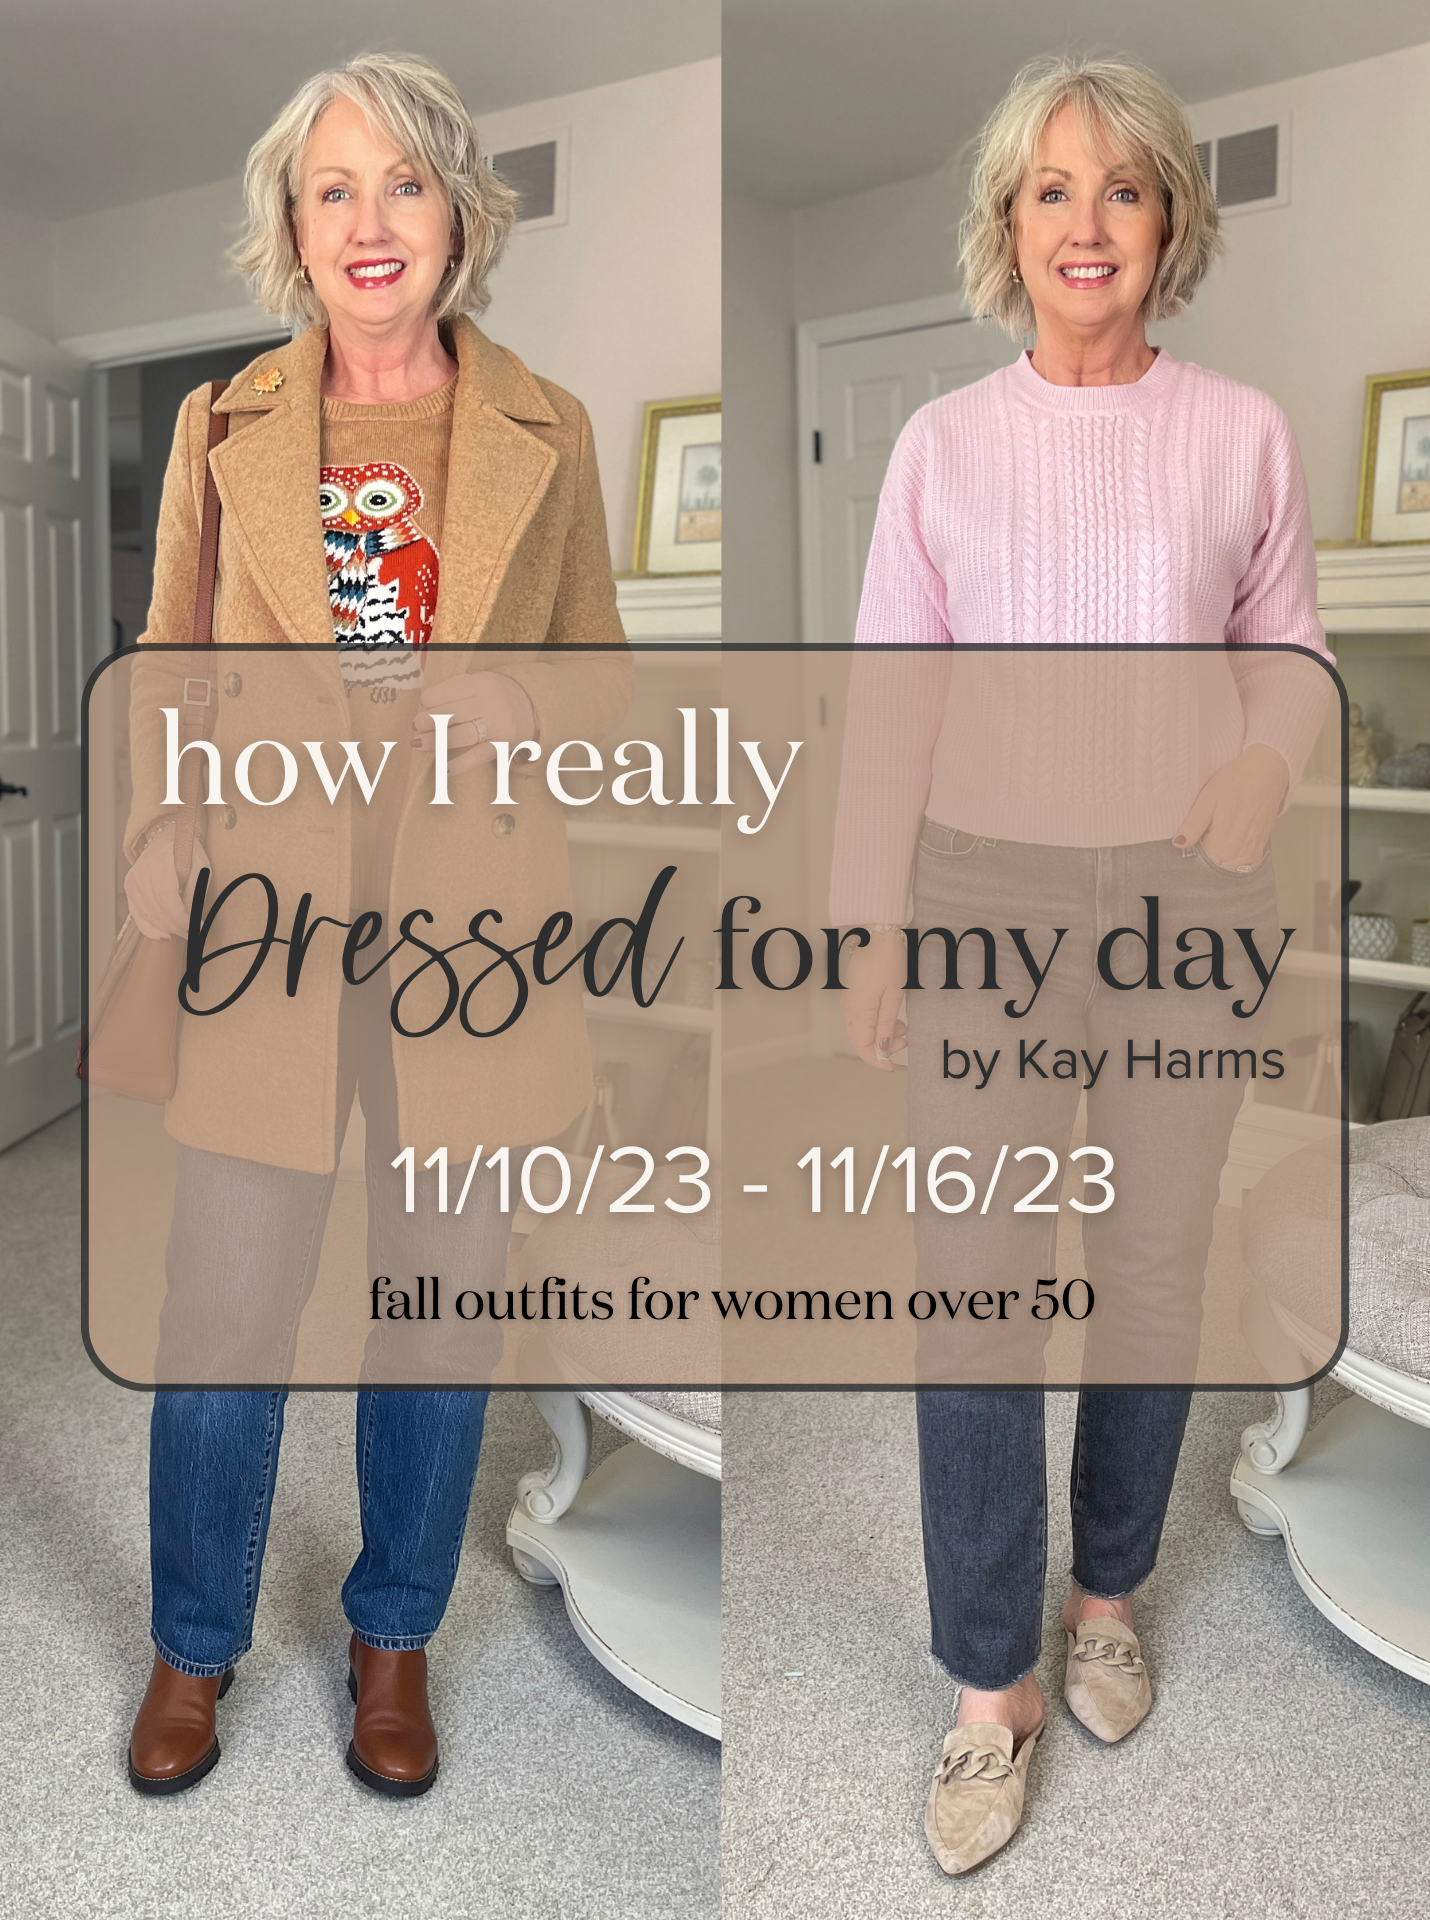 Holiday Outfits From Kohl's For Women Over 50 - 50 IS NOT OLD - A Fashion  And Beauty Blog For Women Over 50